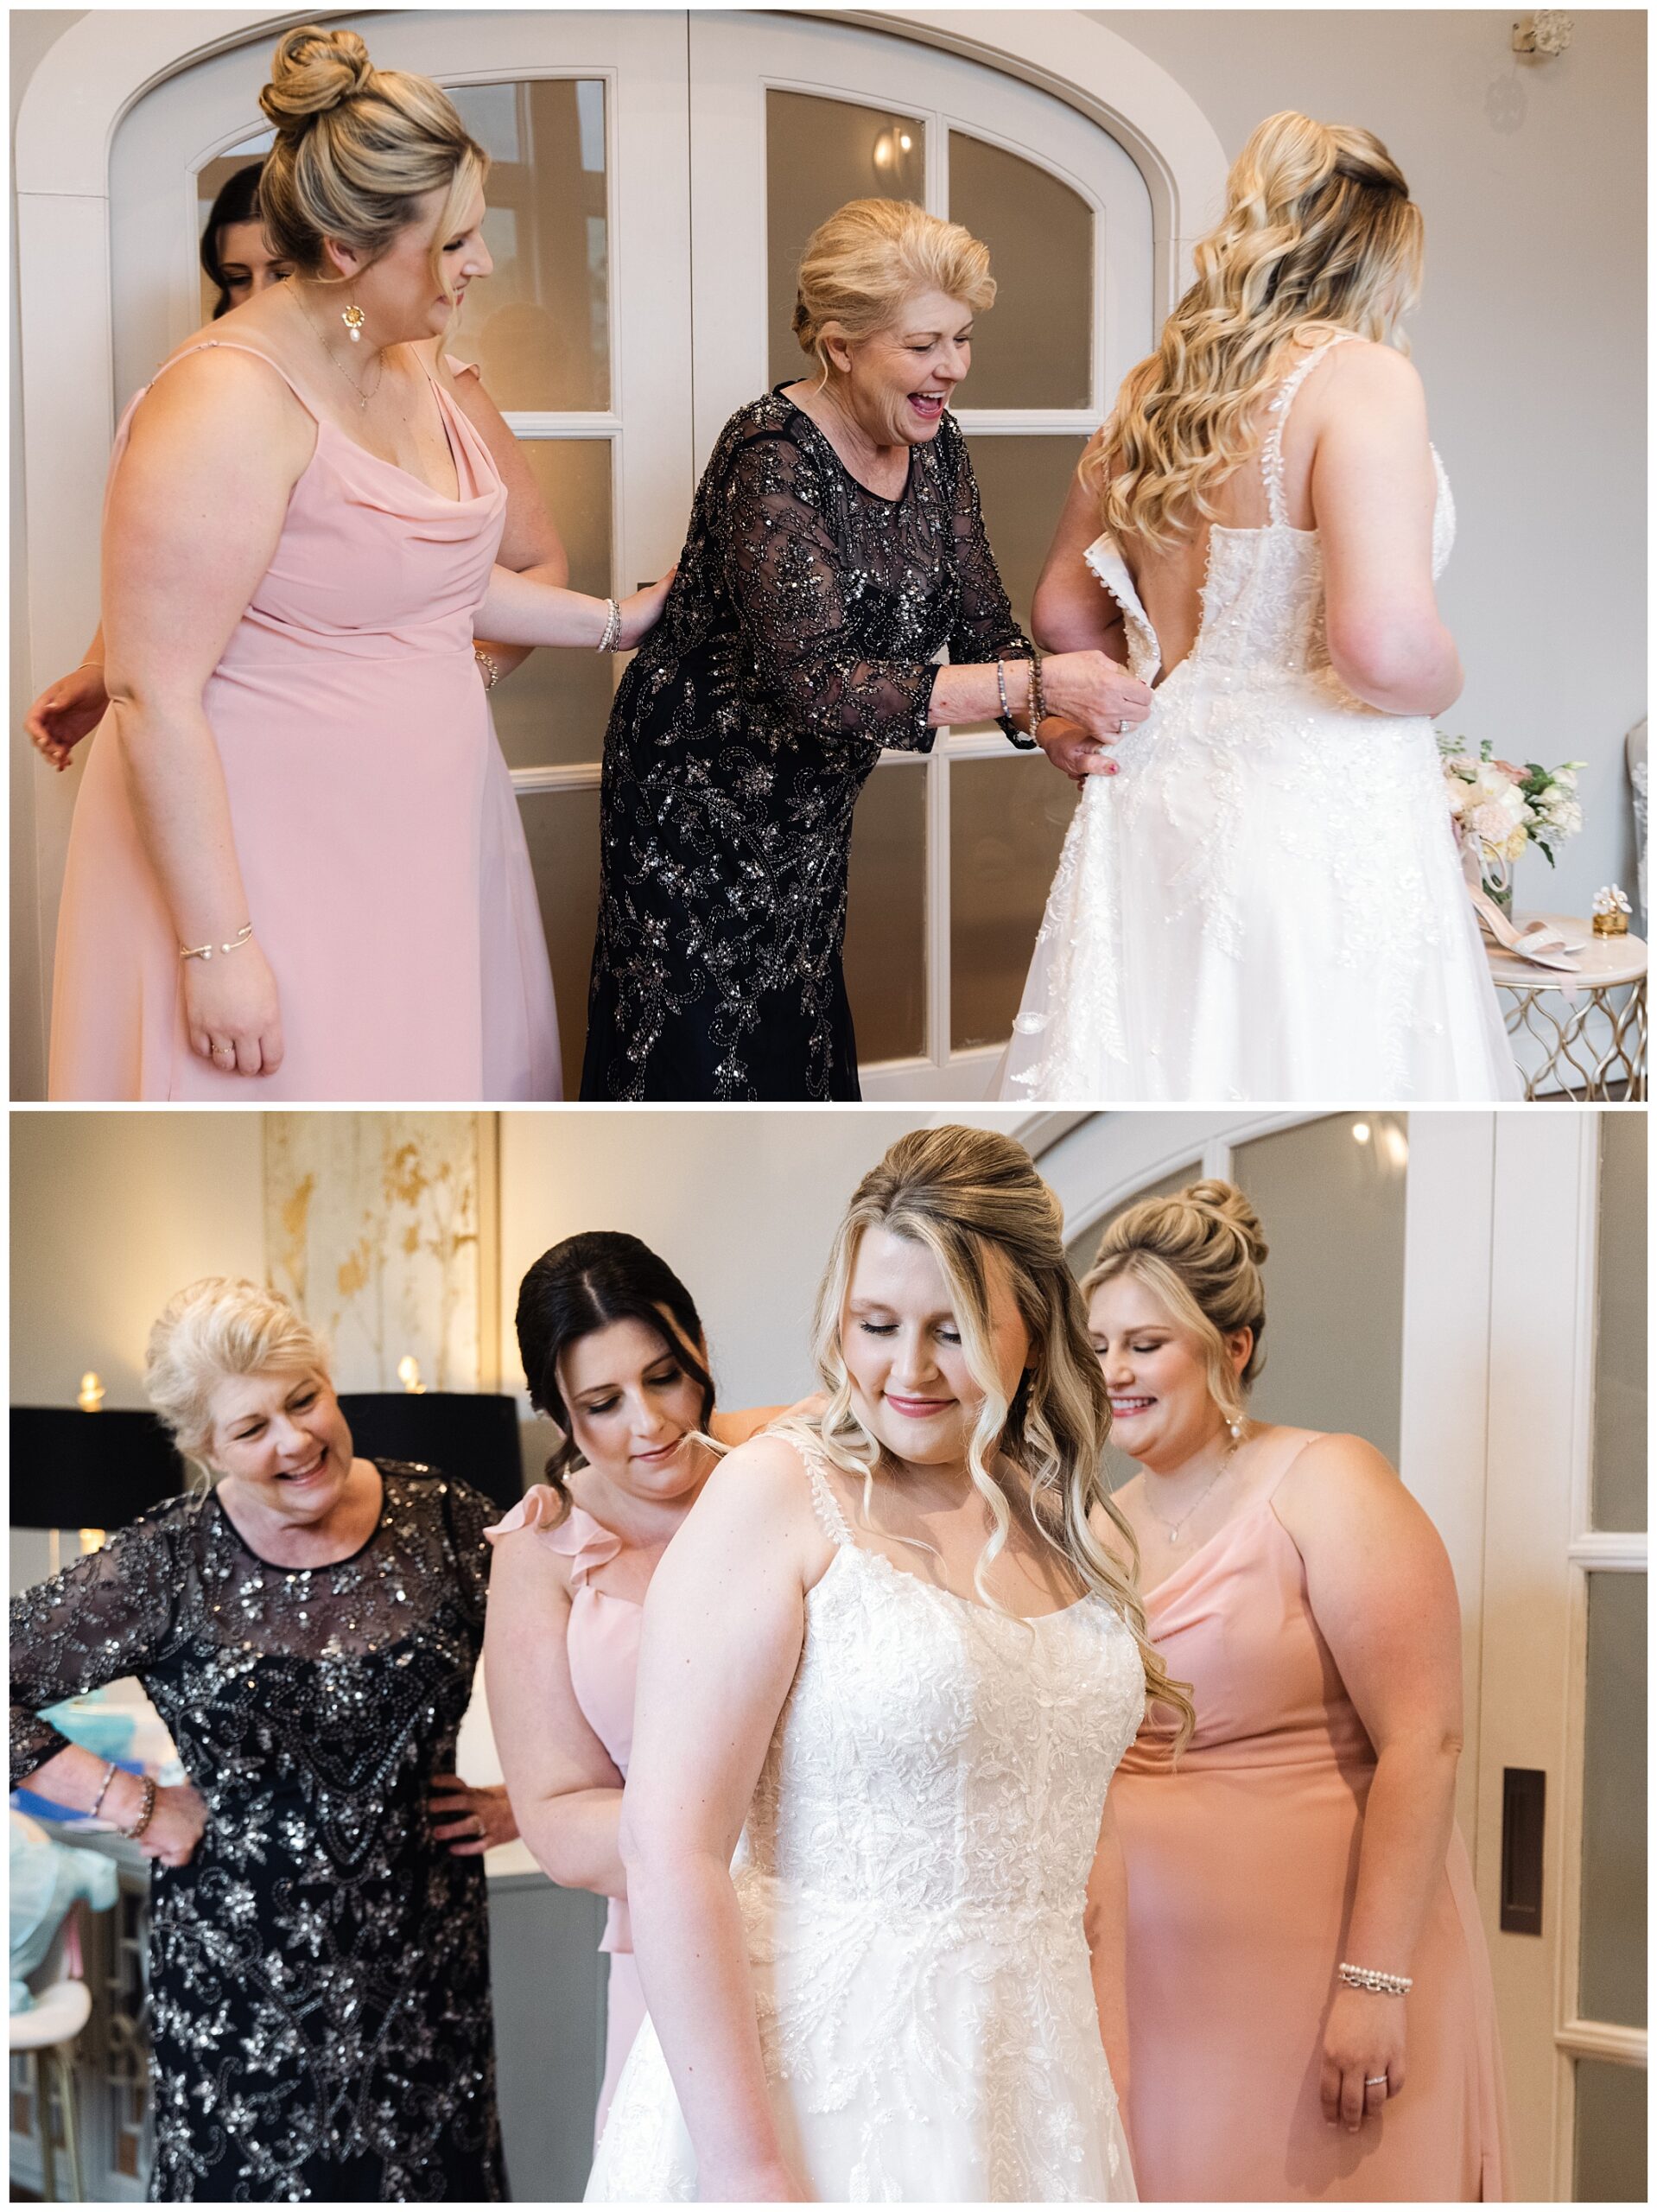 Two images of a mountain wedding at Chestnut Ridge: the top shows an elderly woman holding hands with a bride as another woman watches; the bottom shows the elderly woman and two women admiring the bride's dress.